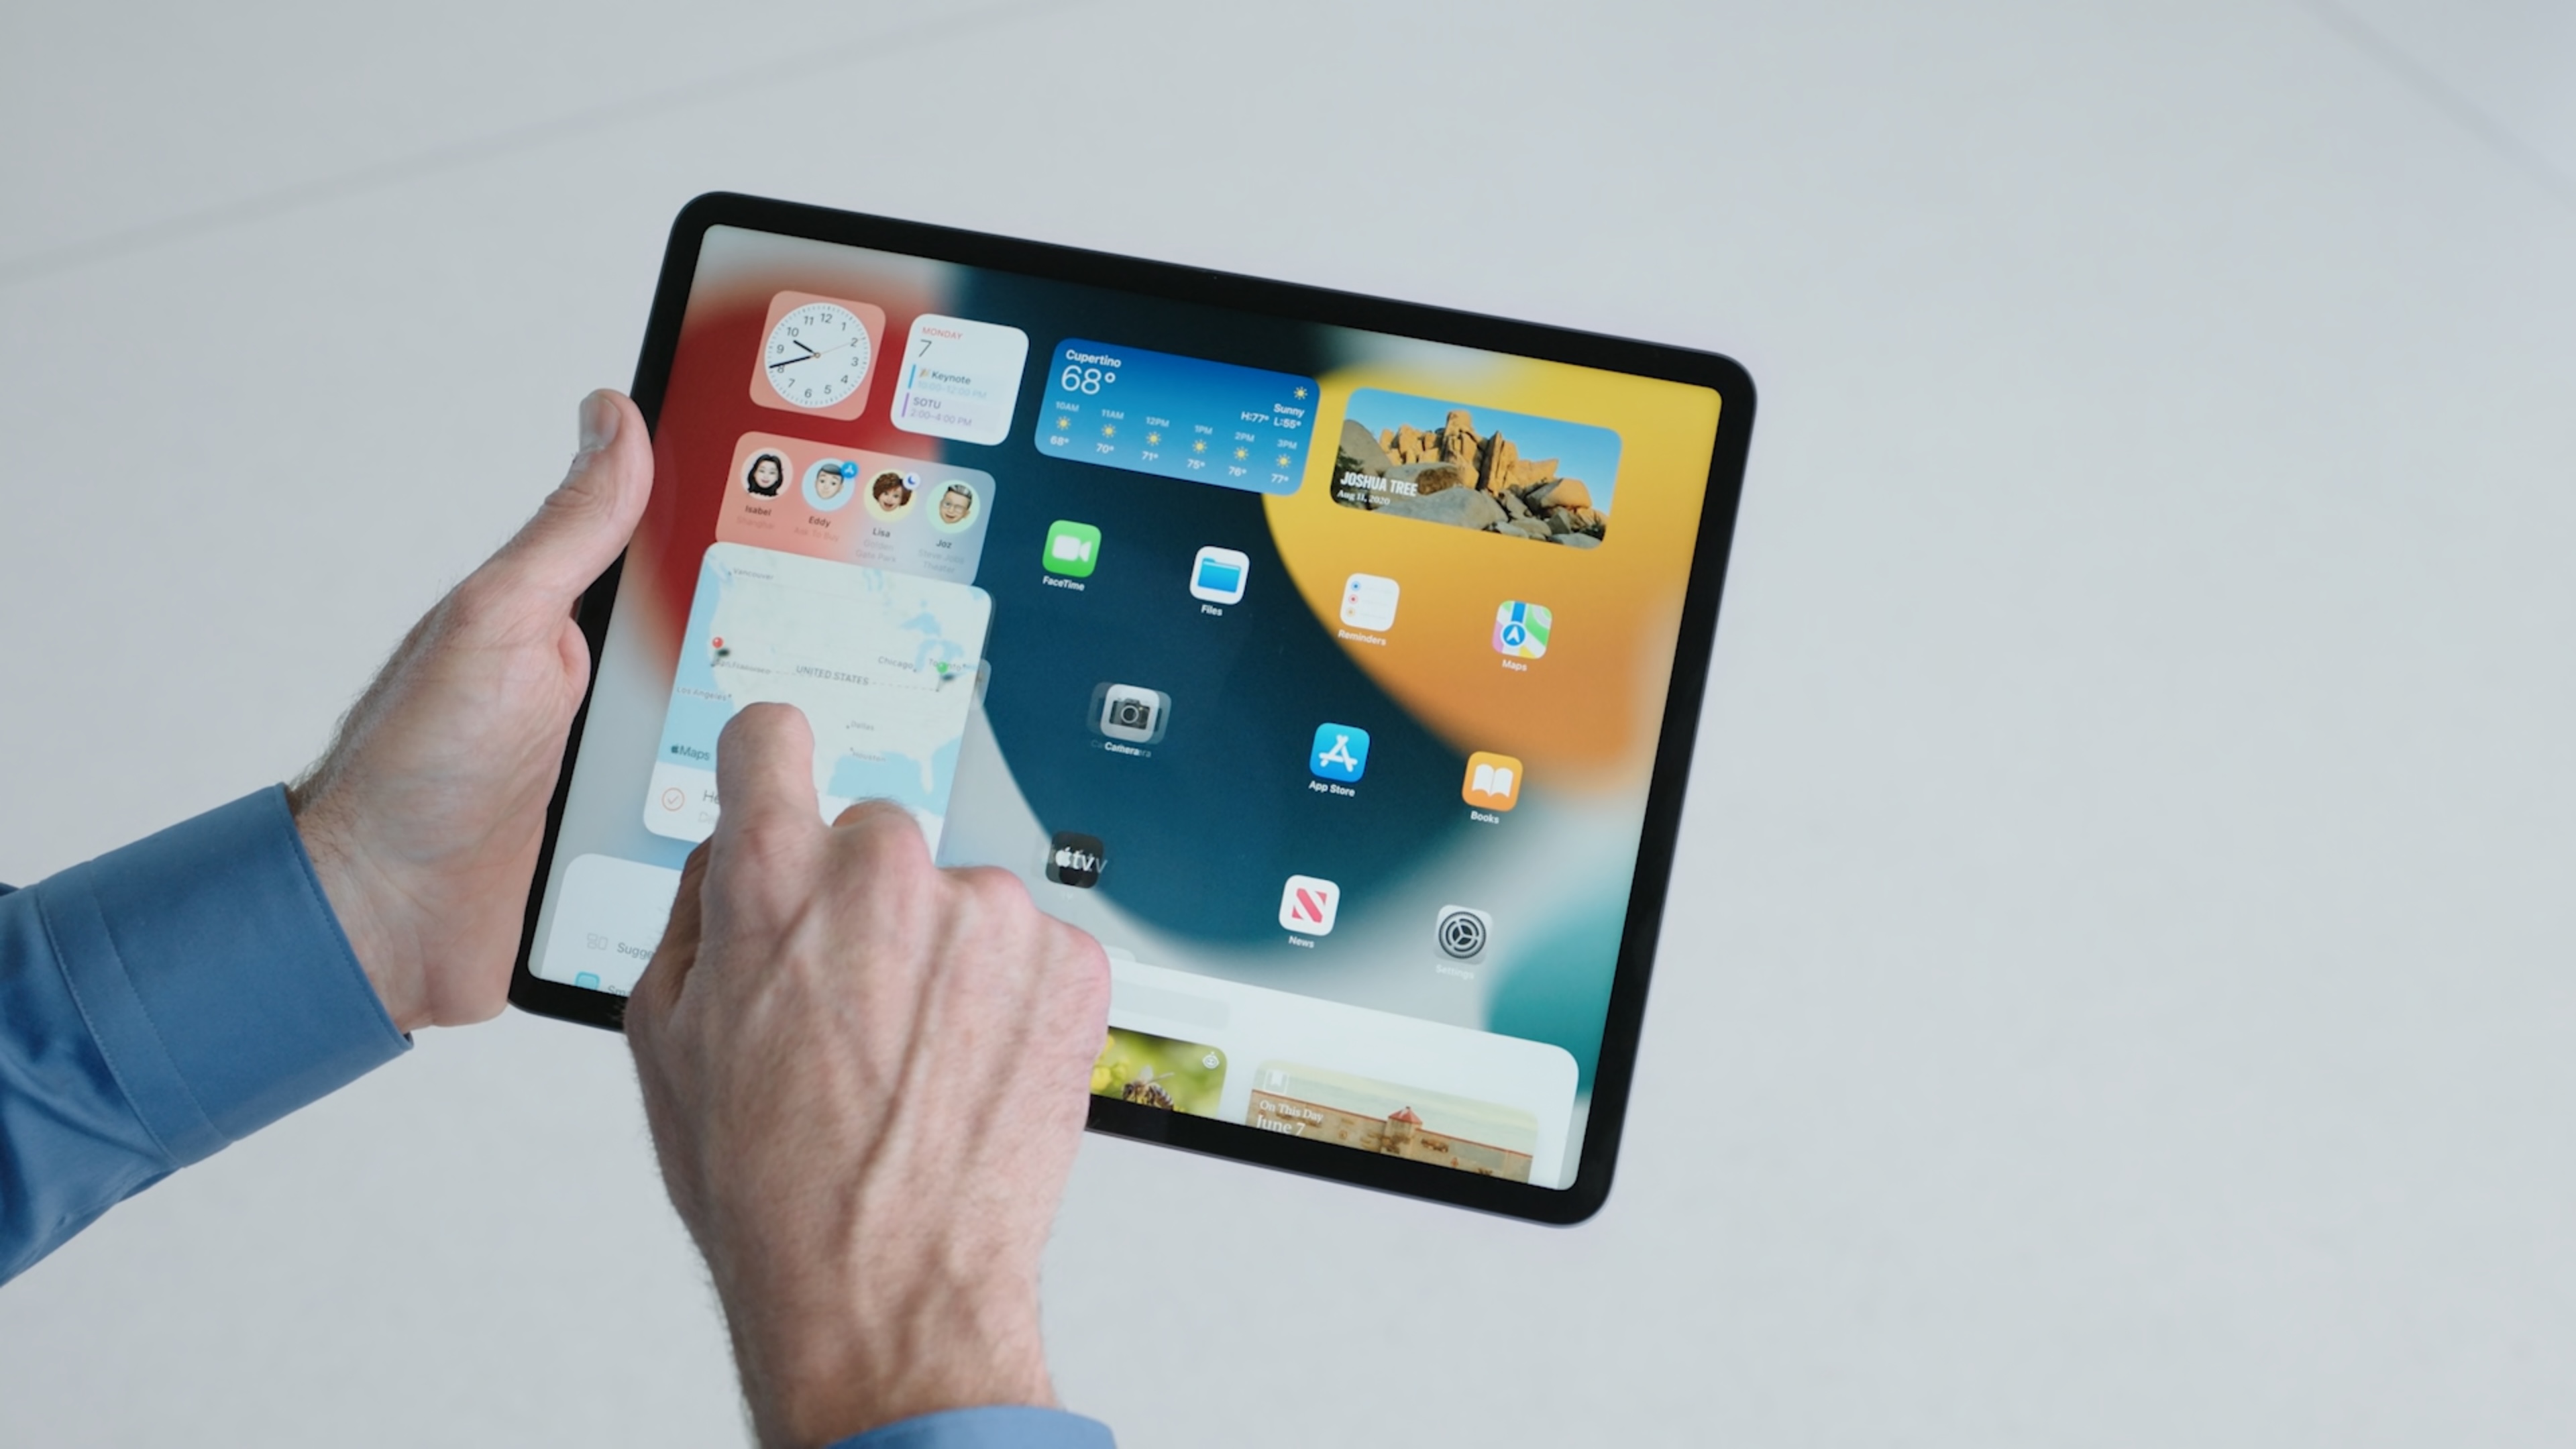 iPadOS 15 announced at WWDC, features improved multitasking and